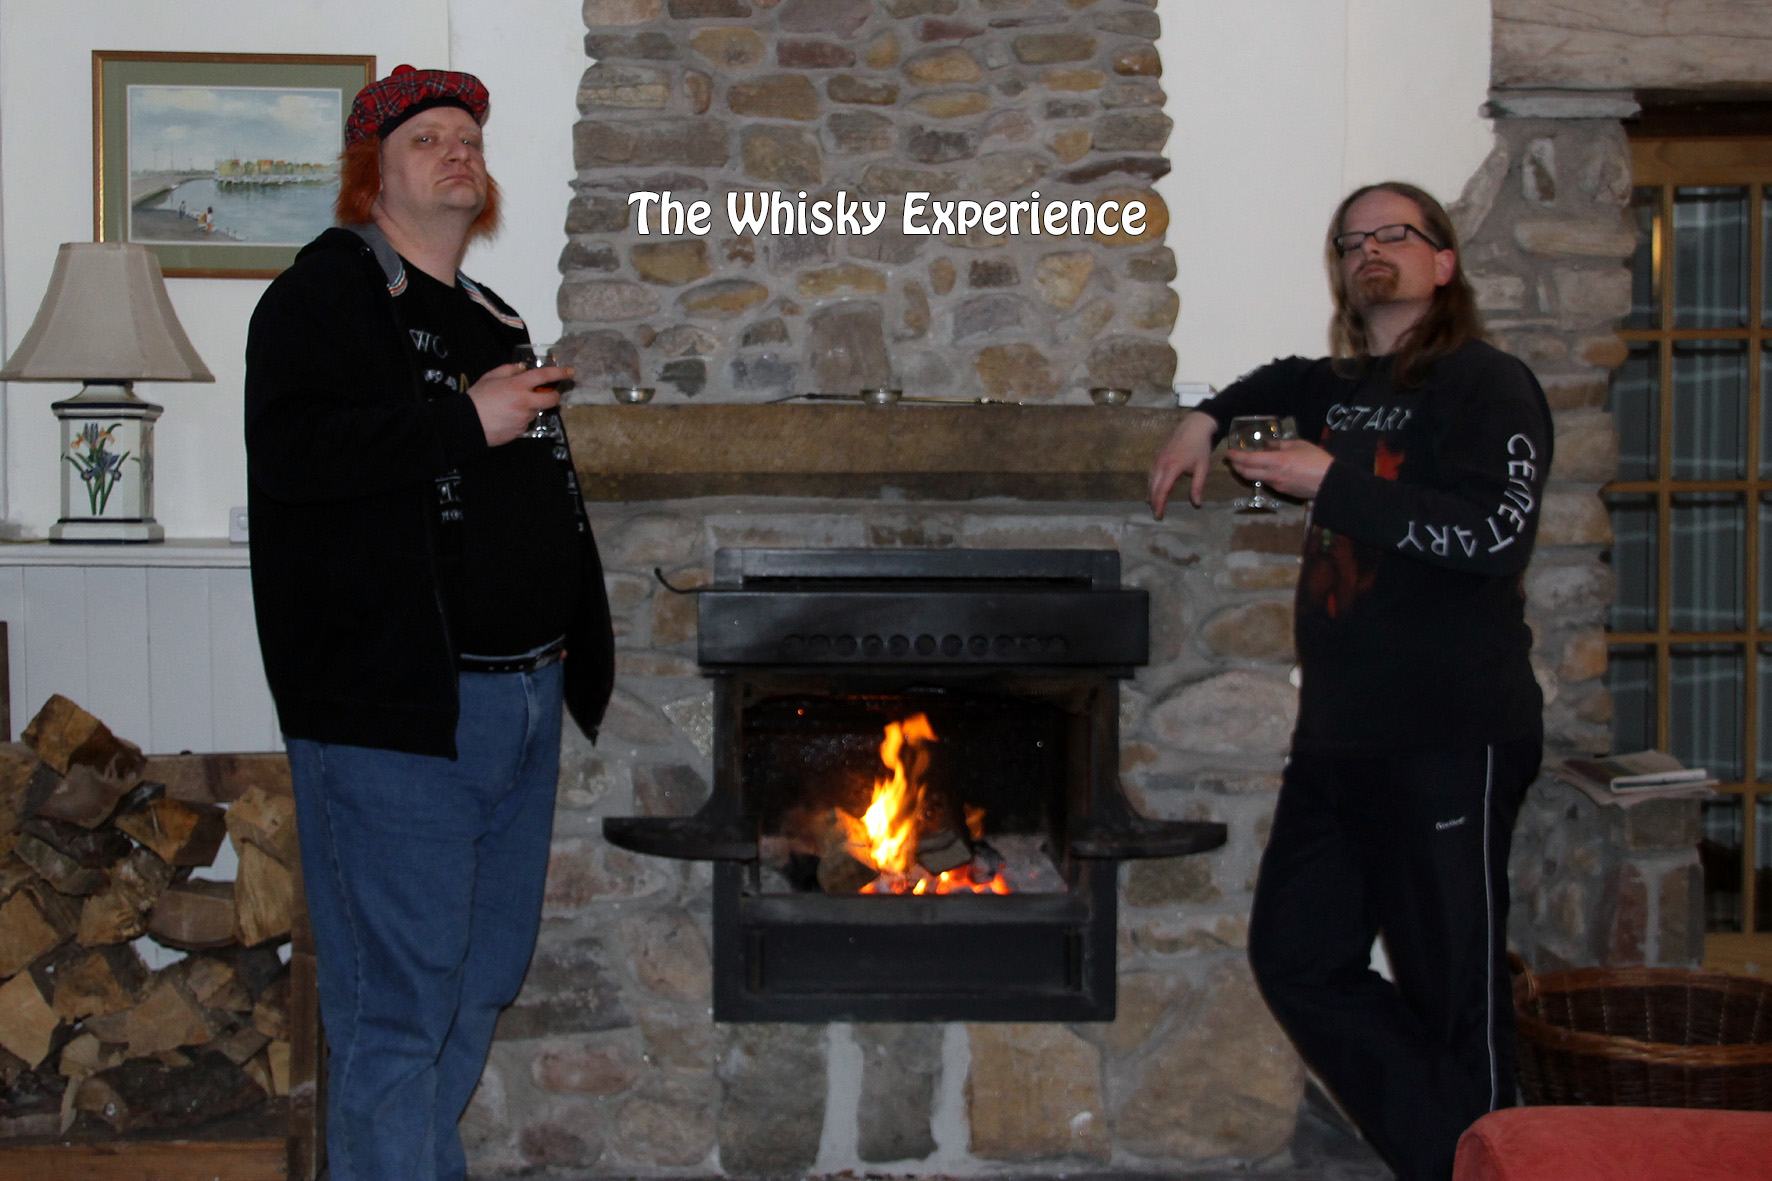 The Whisky Experience